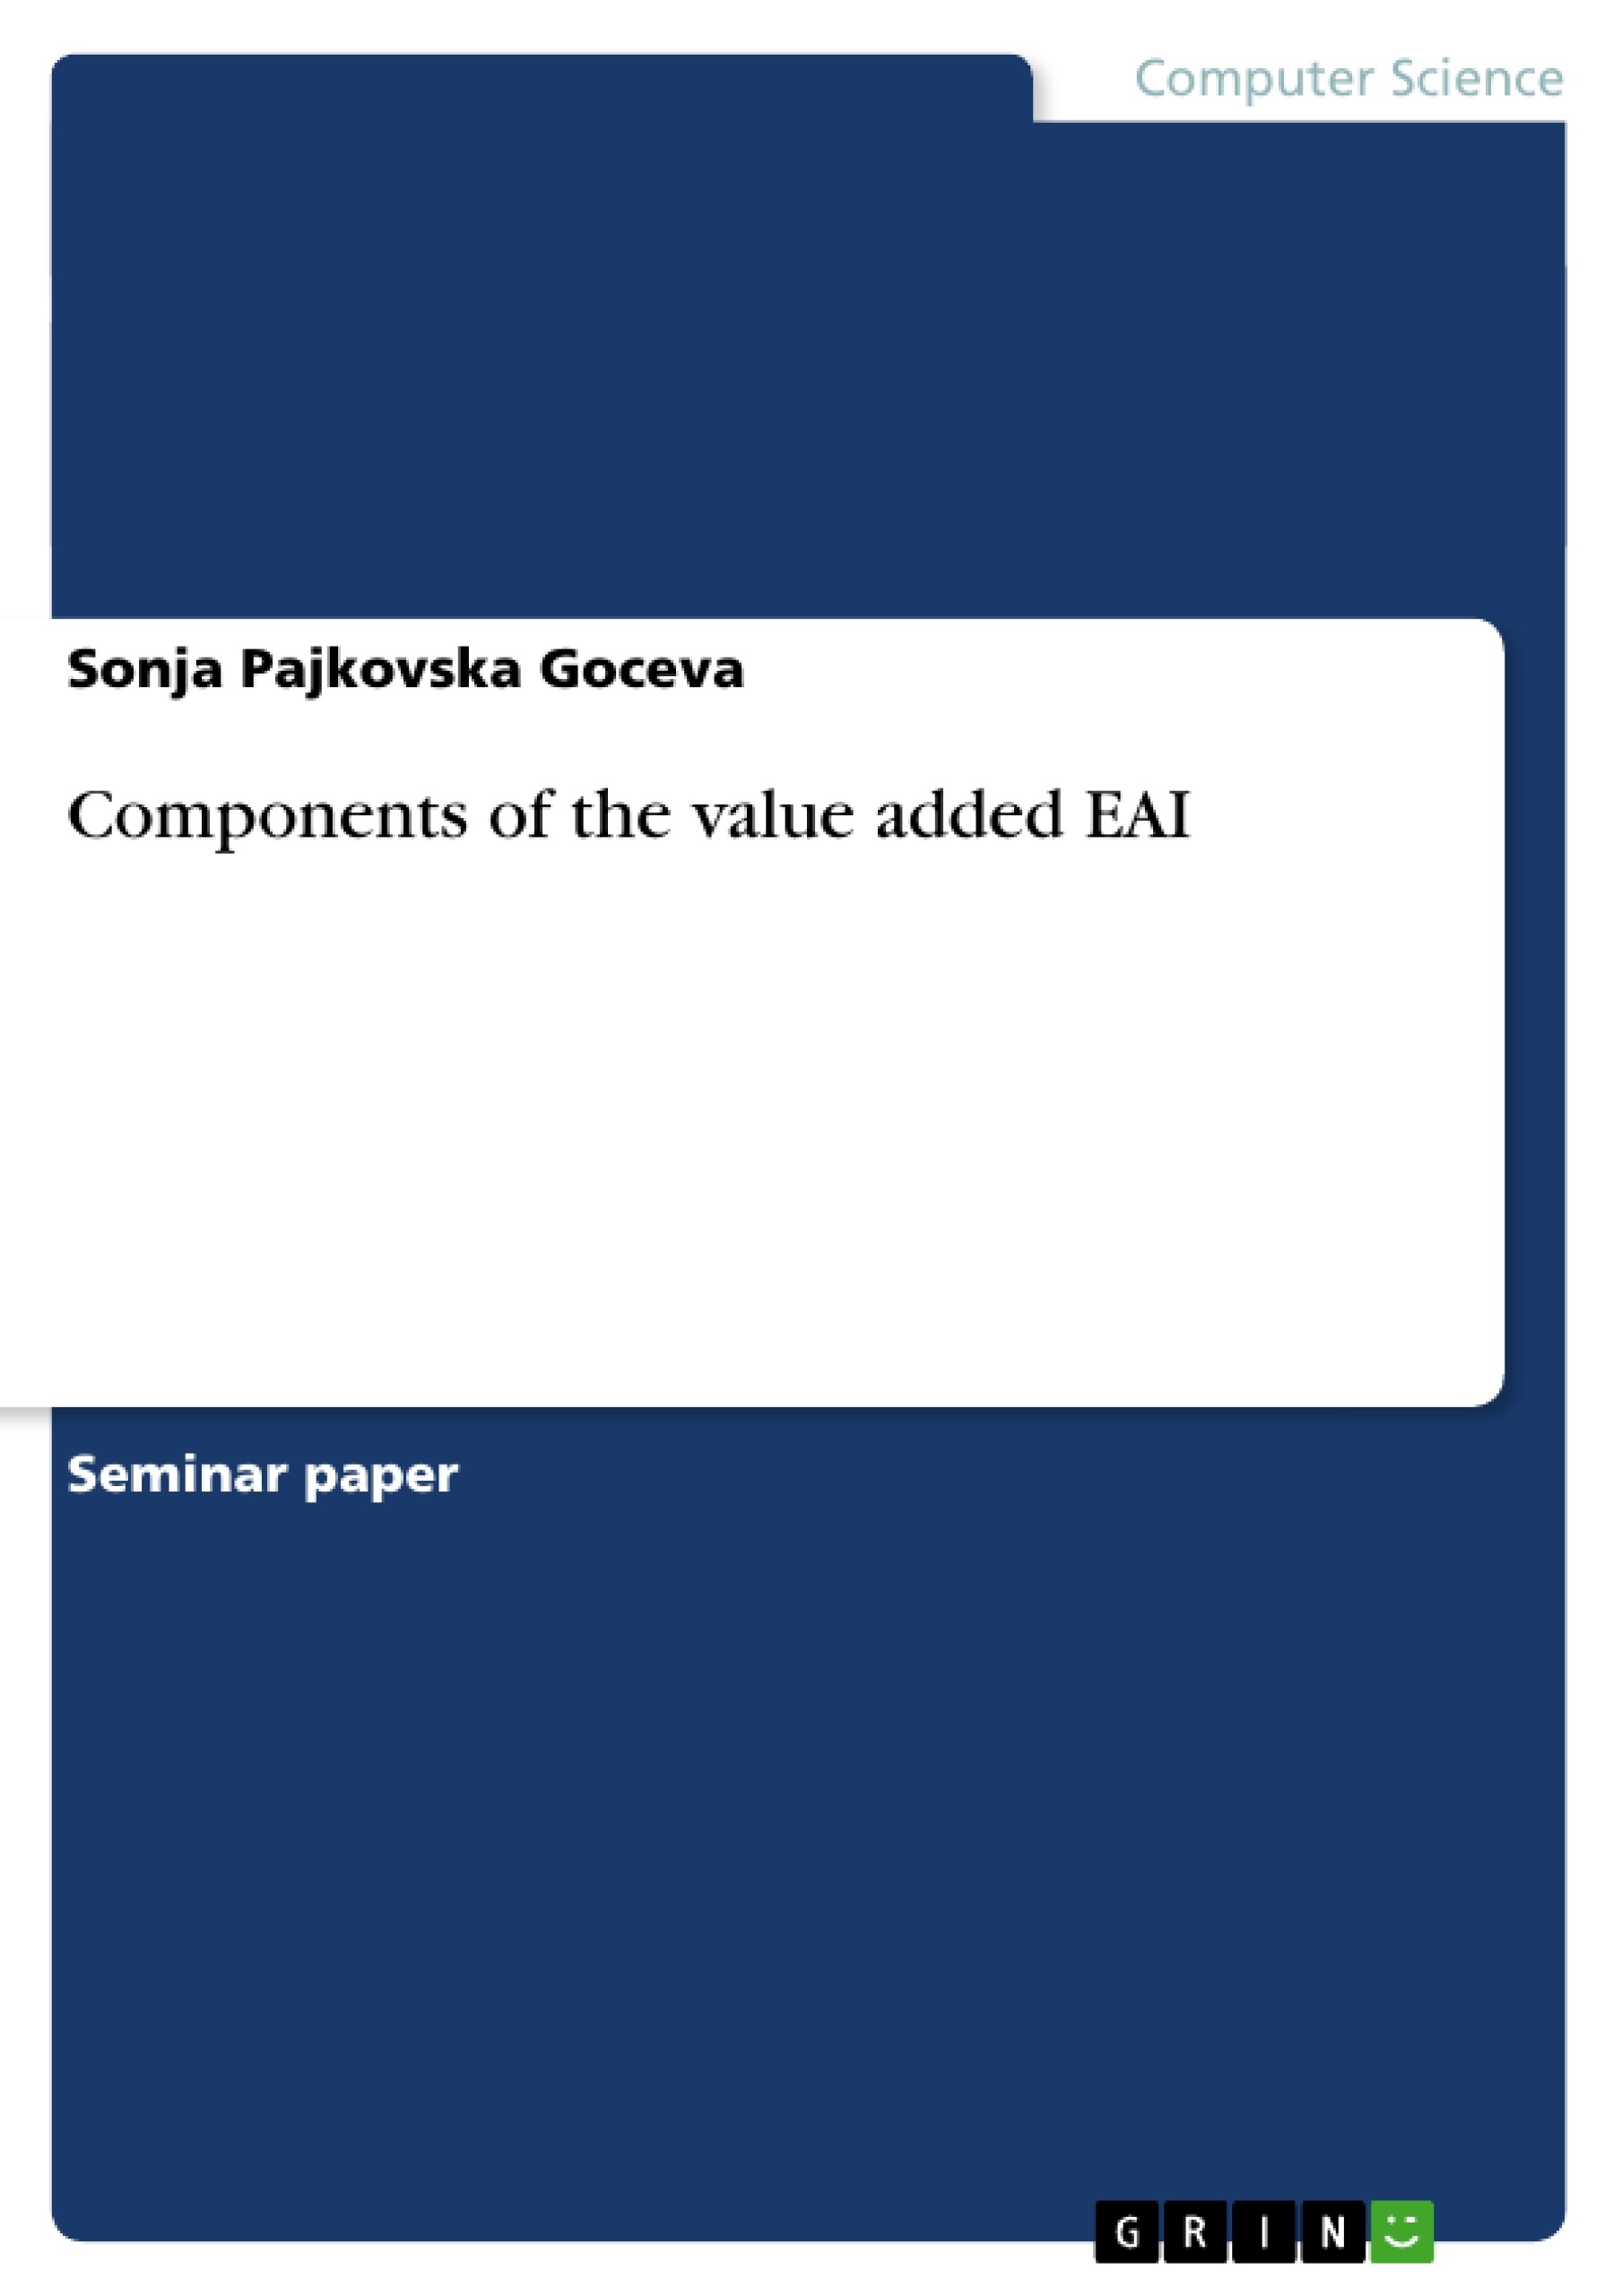 Title: Components of the value added EAI